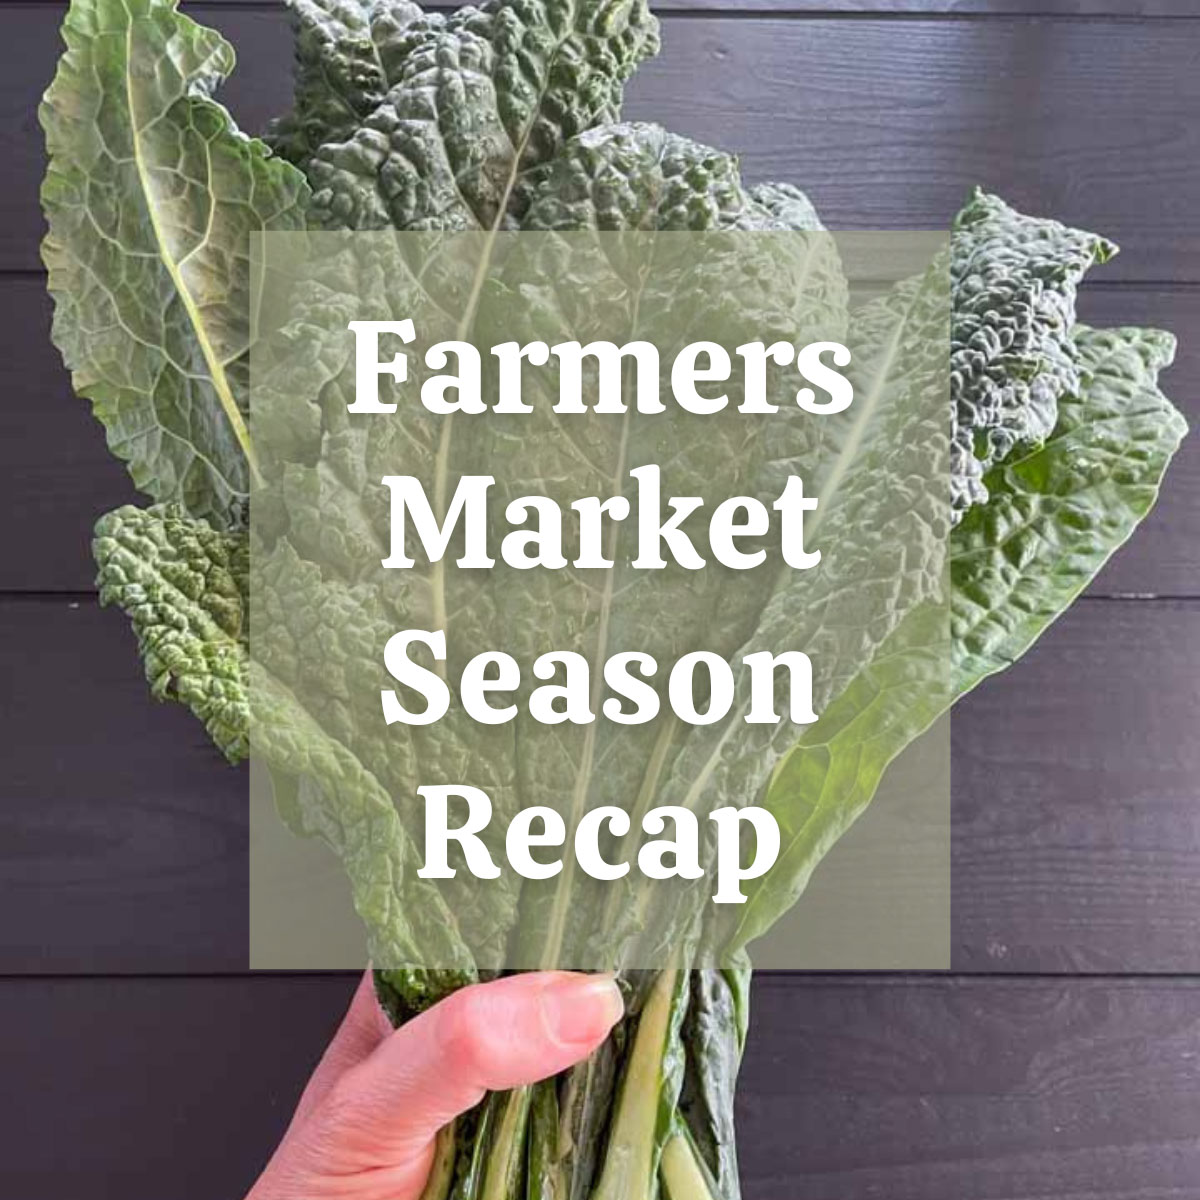 Kale from the farmers market, overlaid with the text "Farmers Market Season Recap"